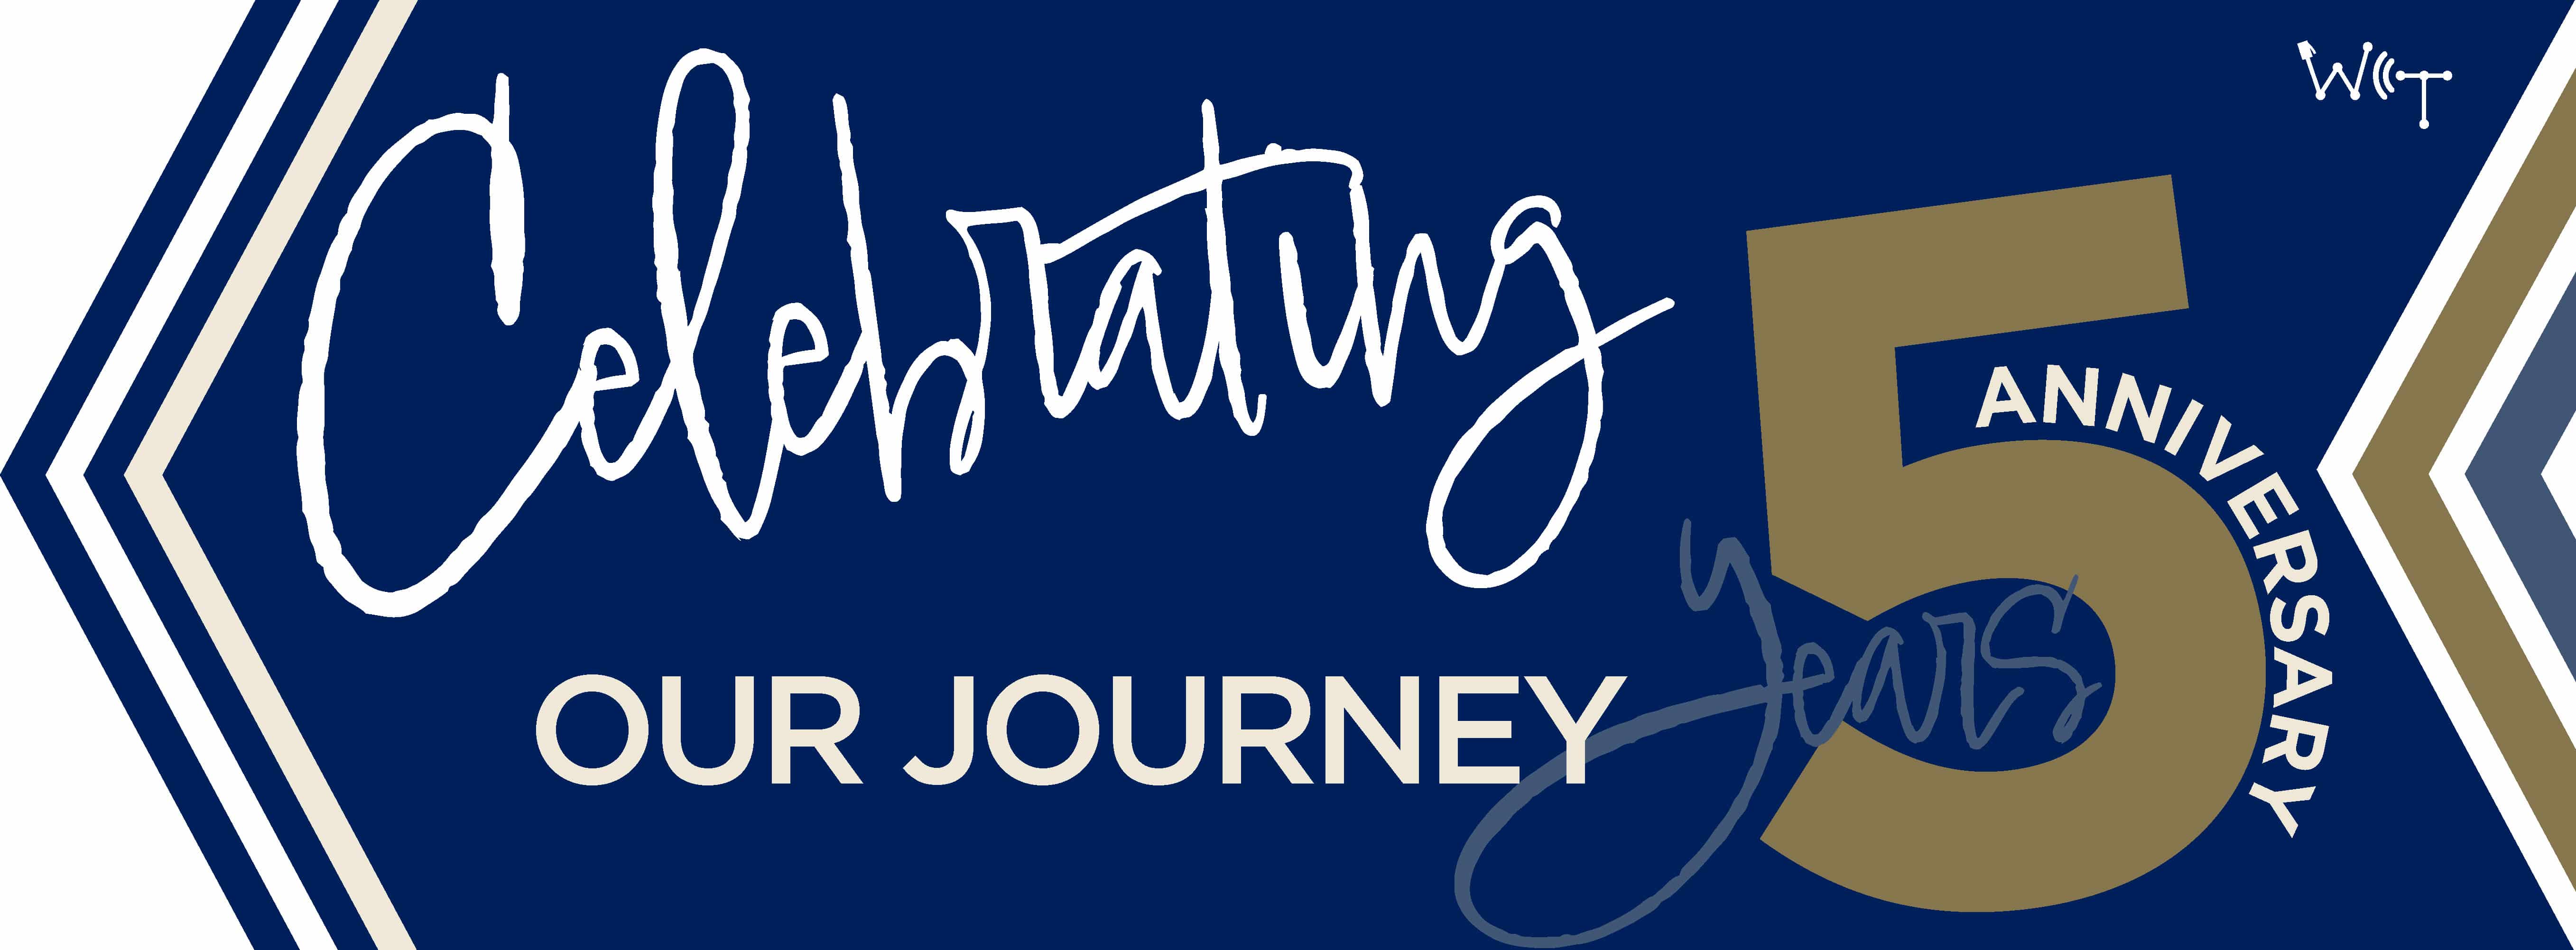 Our Journey Five Year Anniversary Celebration